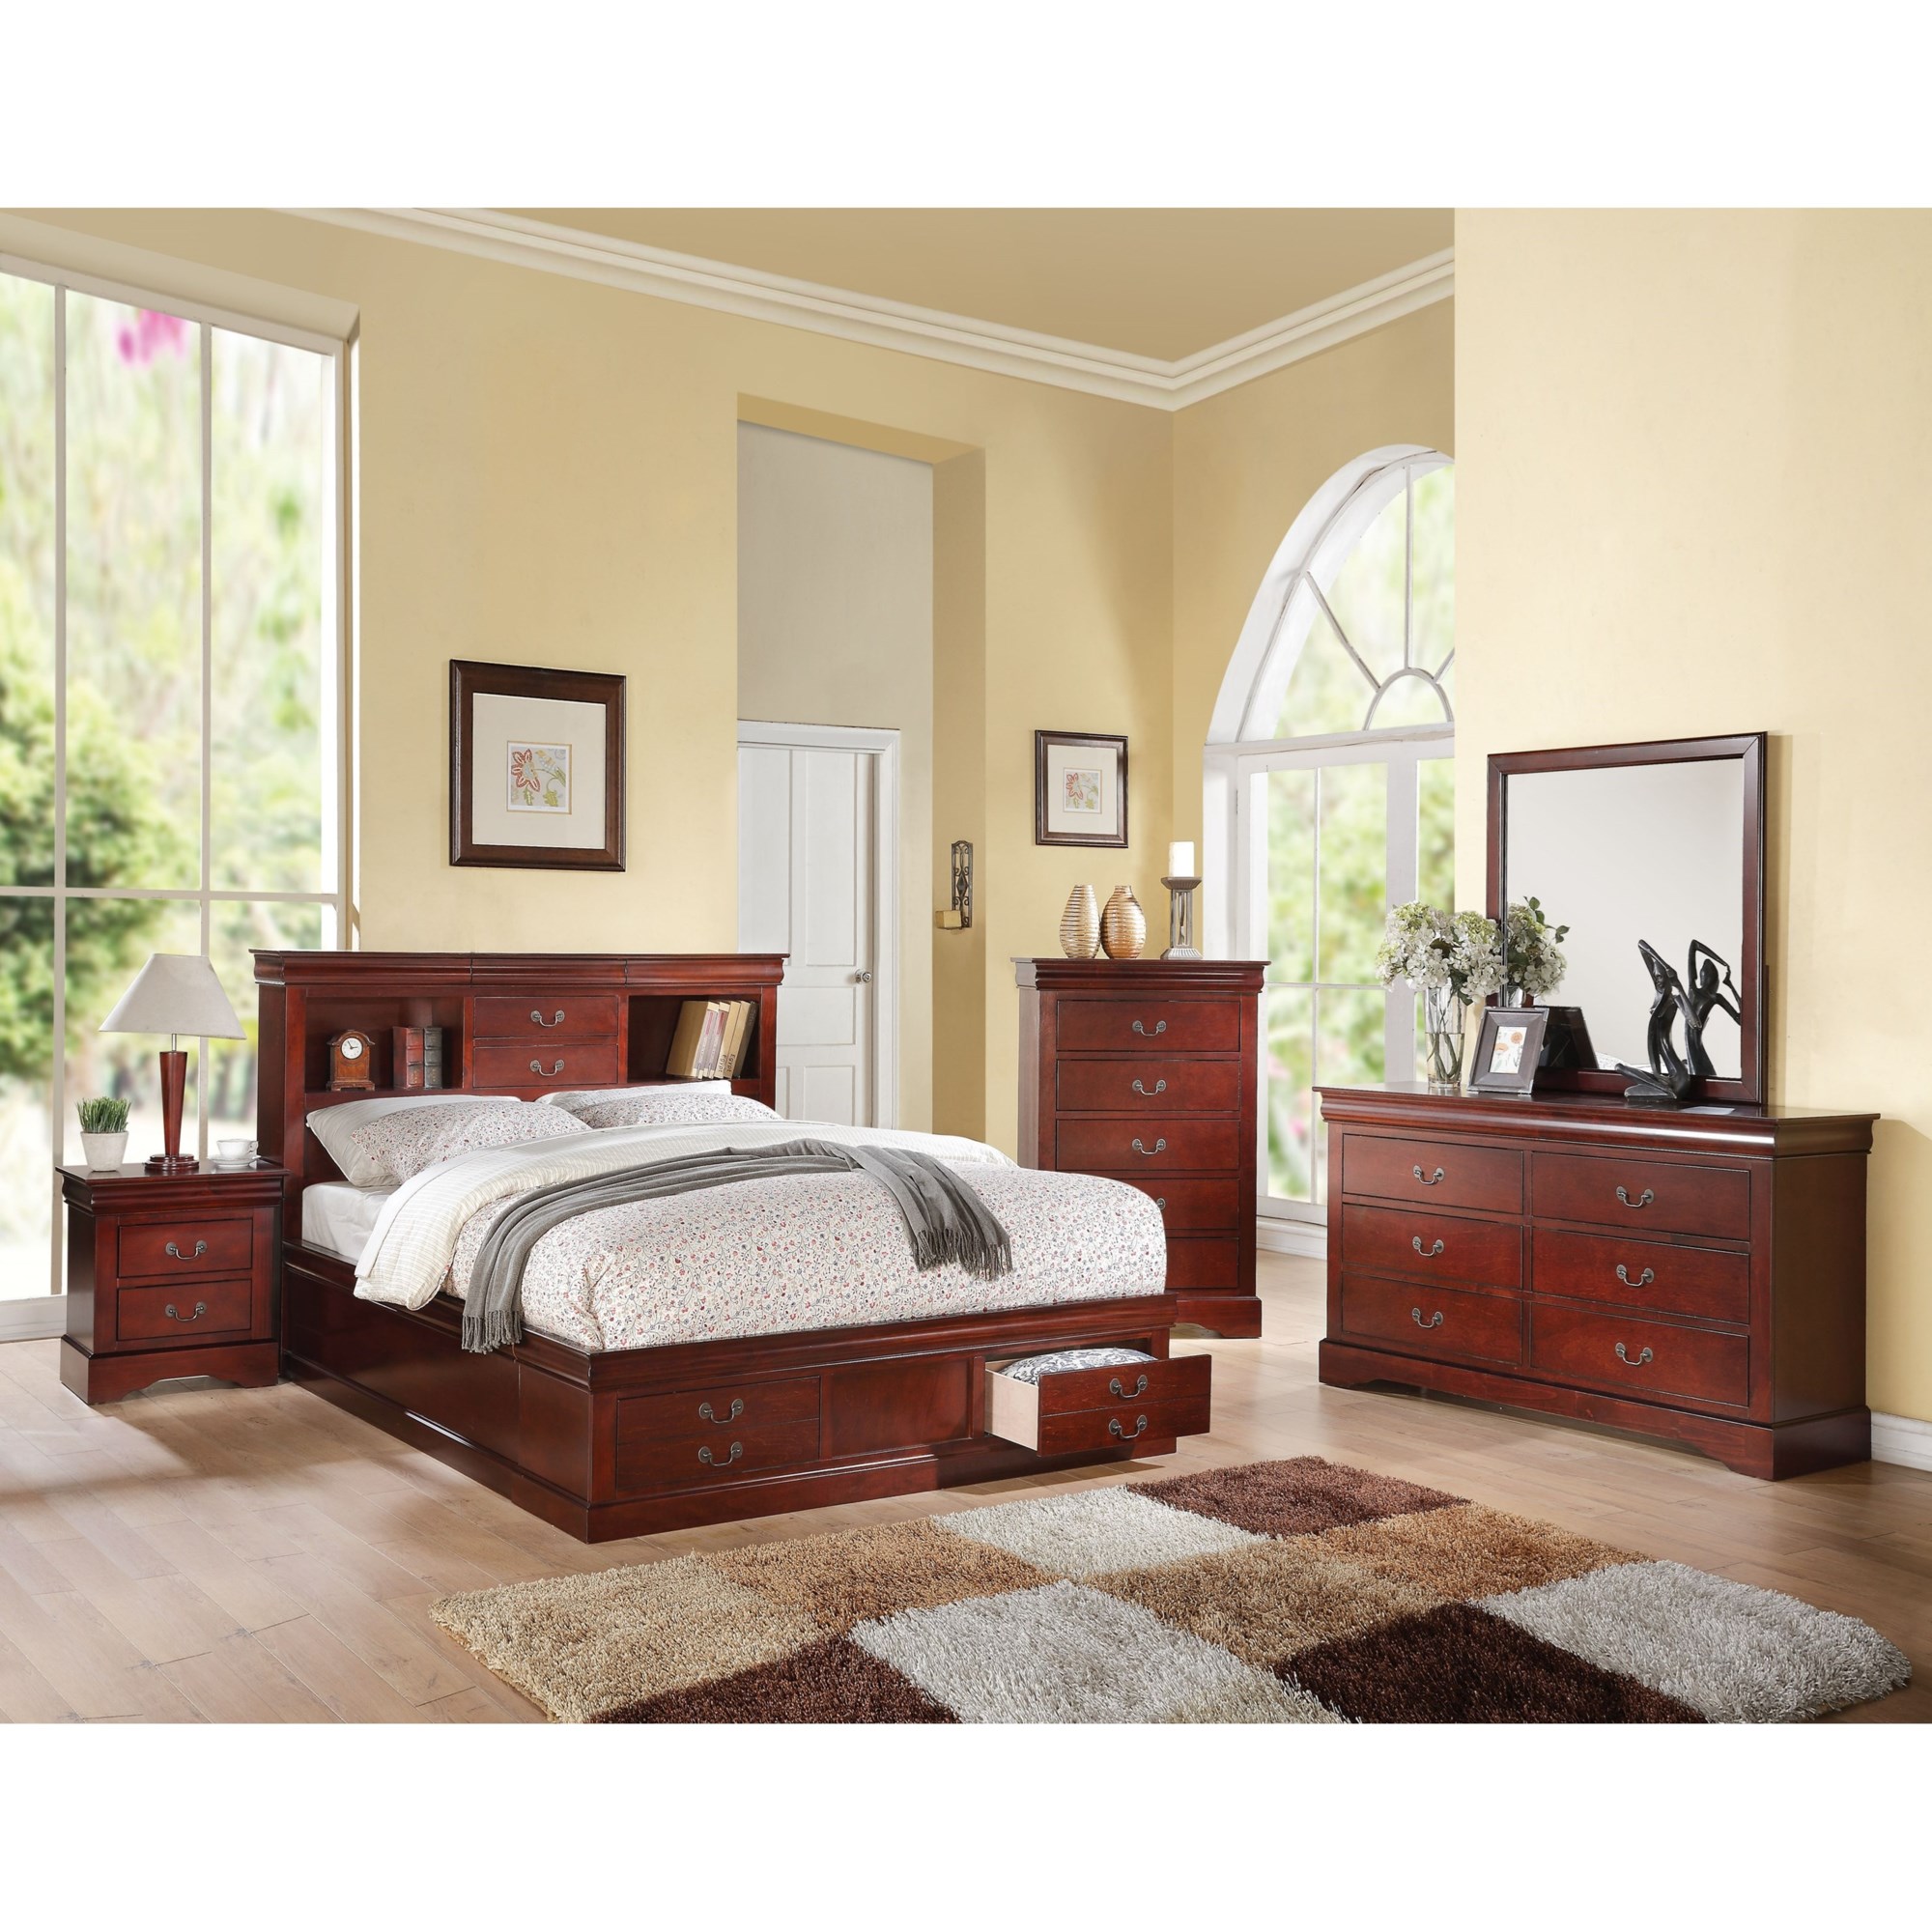  Acme Furniture Louis Philippe III Traditional Wood Sleigh King  Bed in Cherry : Home & Kitchen